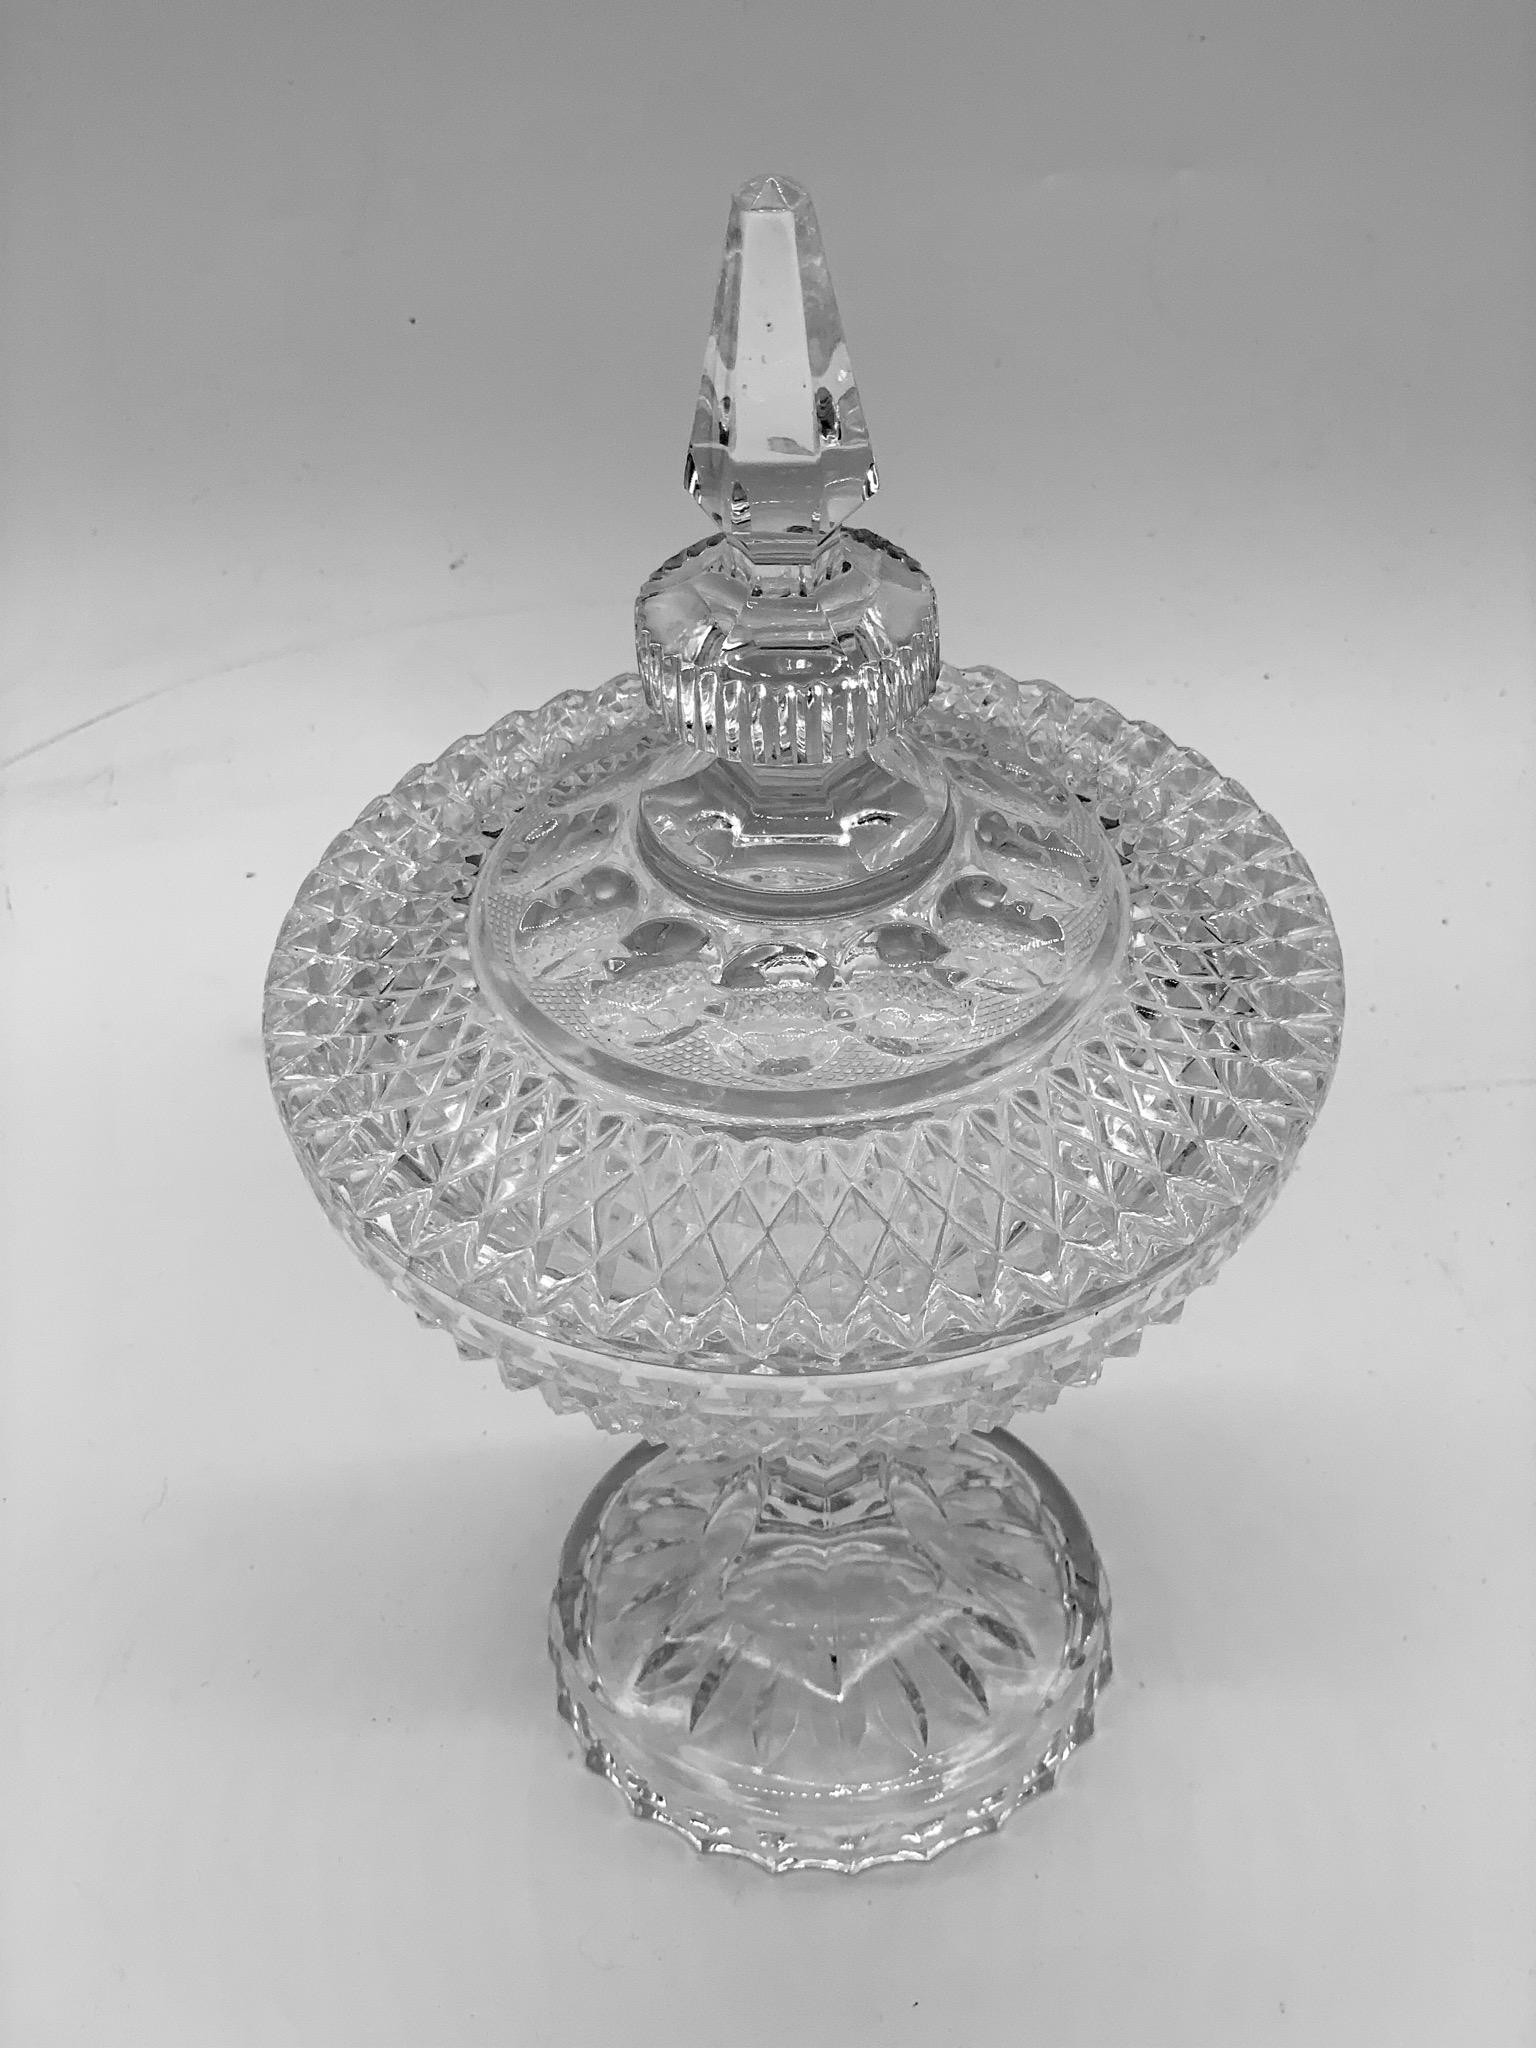 Beautiful serving stand or bowl with top lid. This cut crystal shows magnificent details and craftsmanship of the 20th century.
 